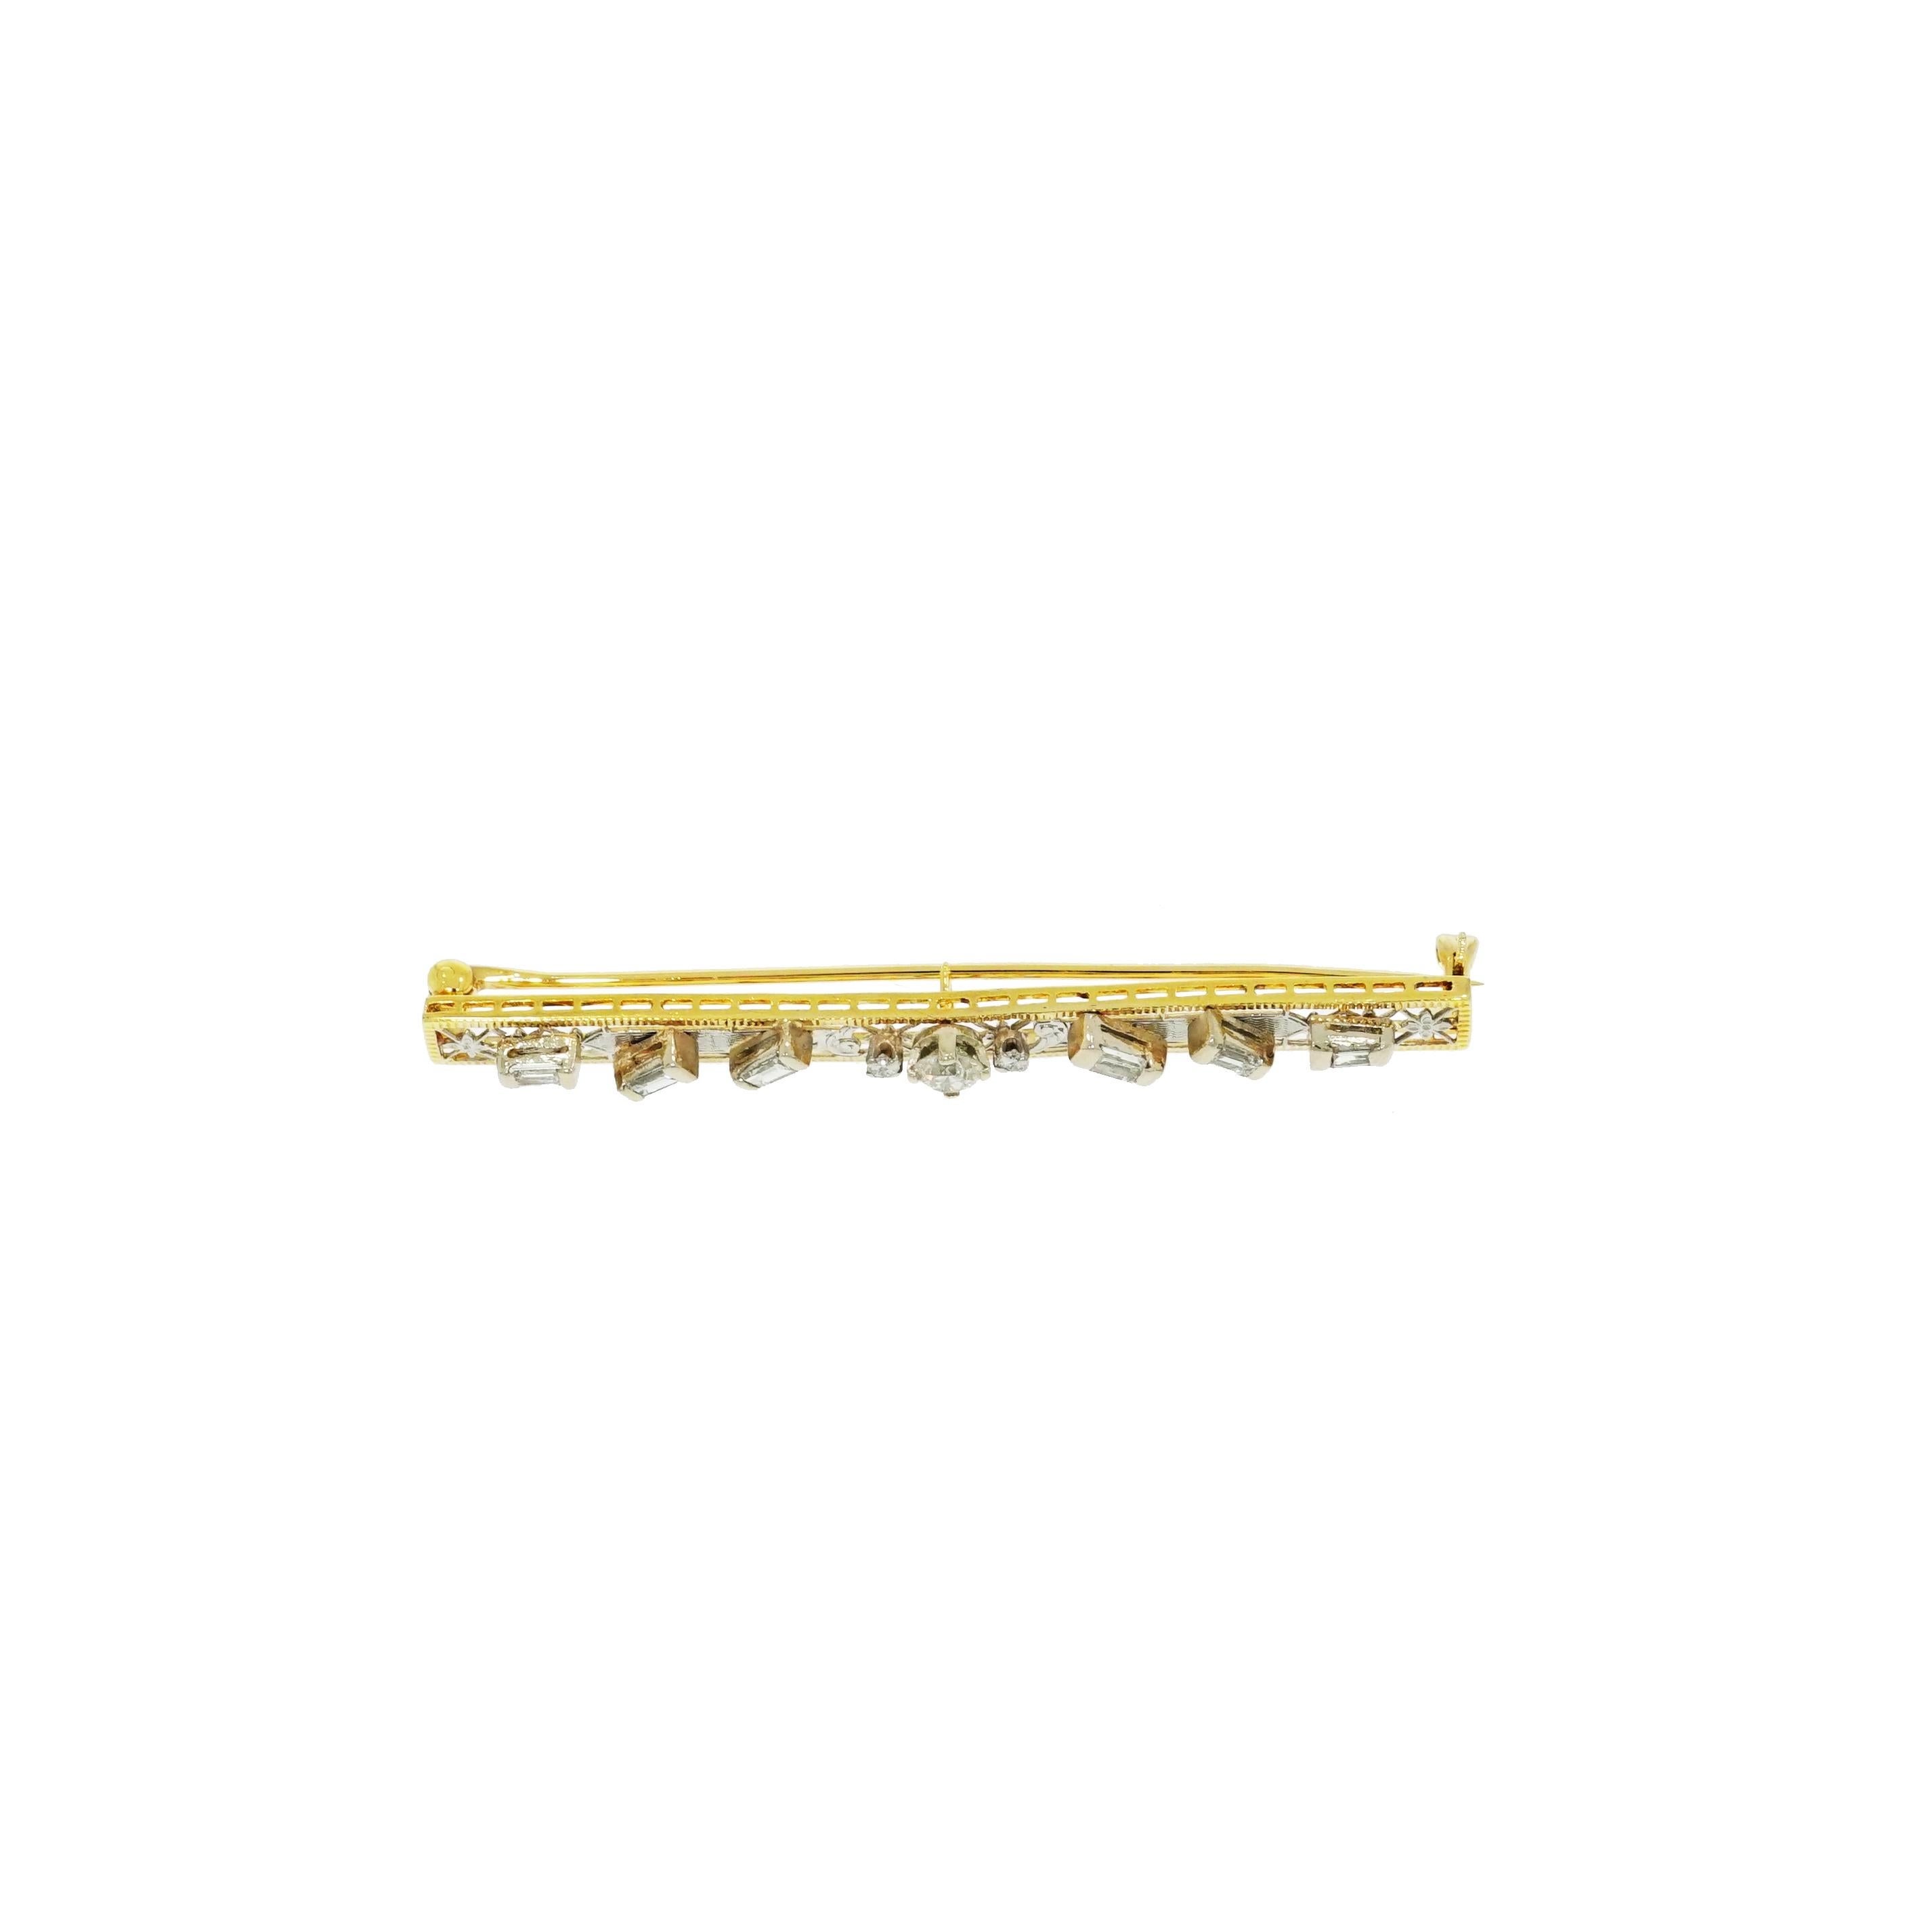 This straight bar brooch has a filigree-work crafted in 14k Yellow Gold, a round Diamond centering and baguette Diamond accents spread along the bar.
The center Diamond is an Old mine cut, weighing approximately 0.20 carat and is accompanied by a